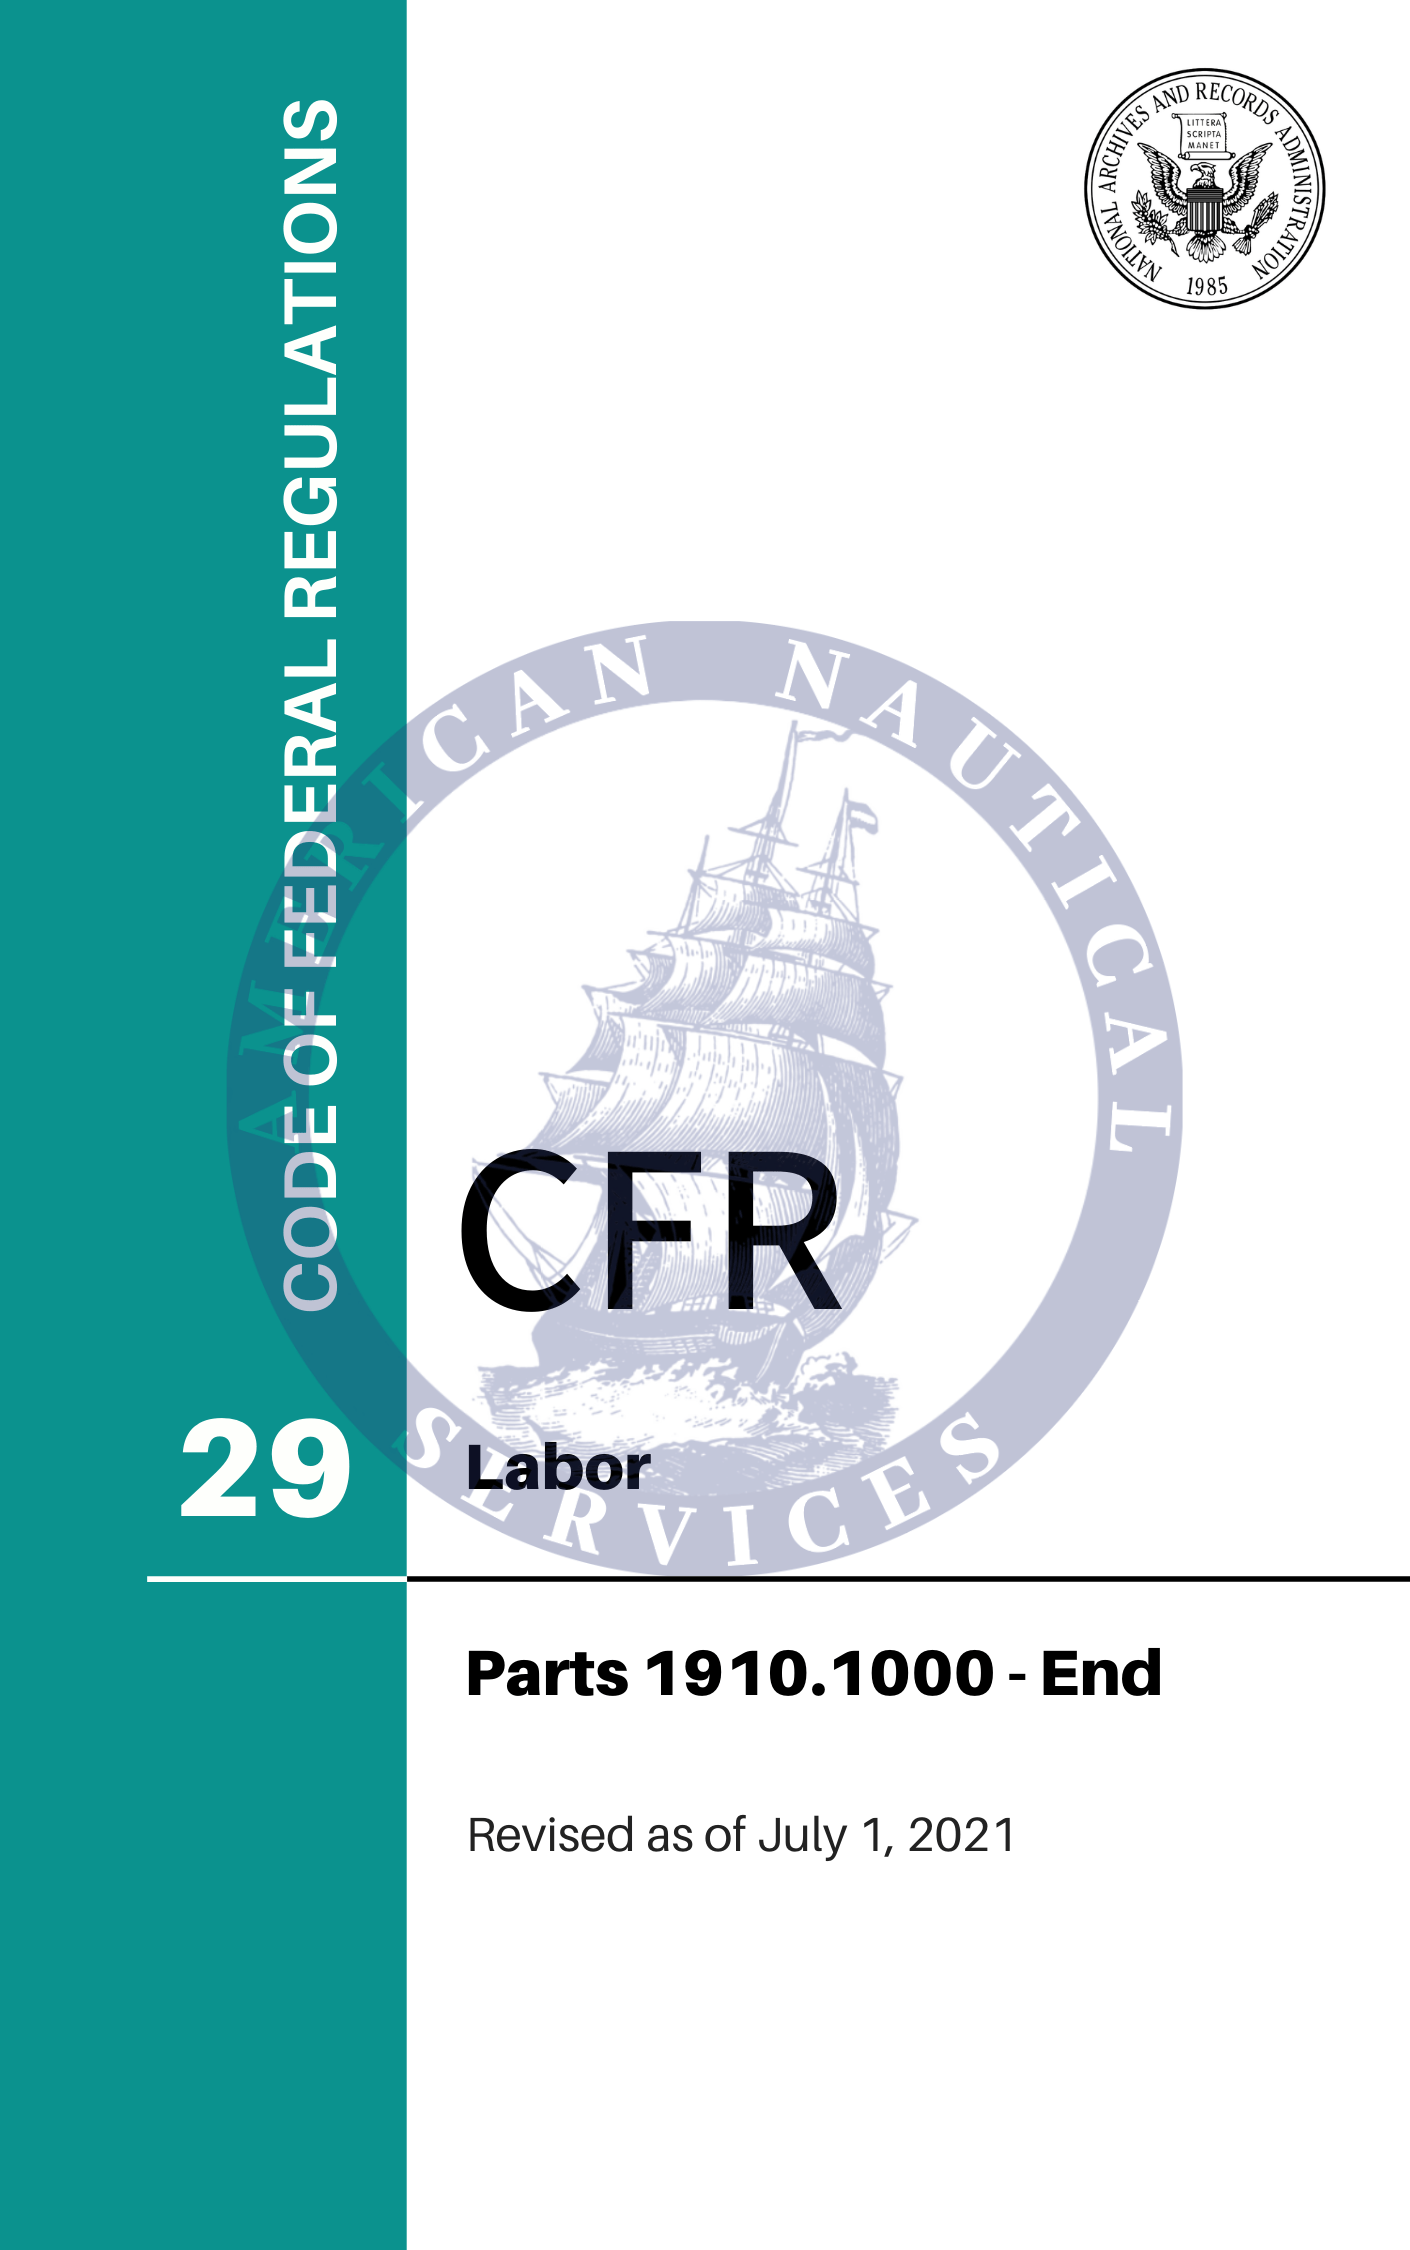 CFR Title 29: Parts 1910.1000-End – Labor (Code of Federal Regulations), Revised as of July 1, 2021